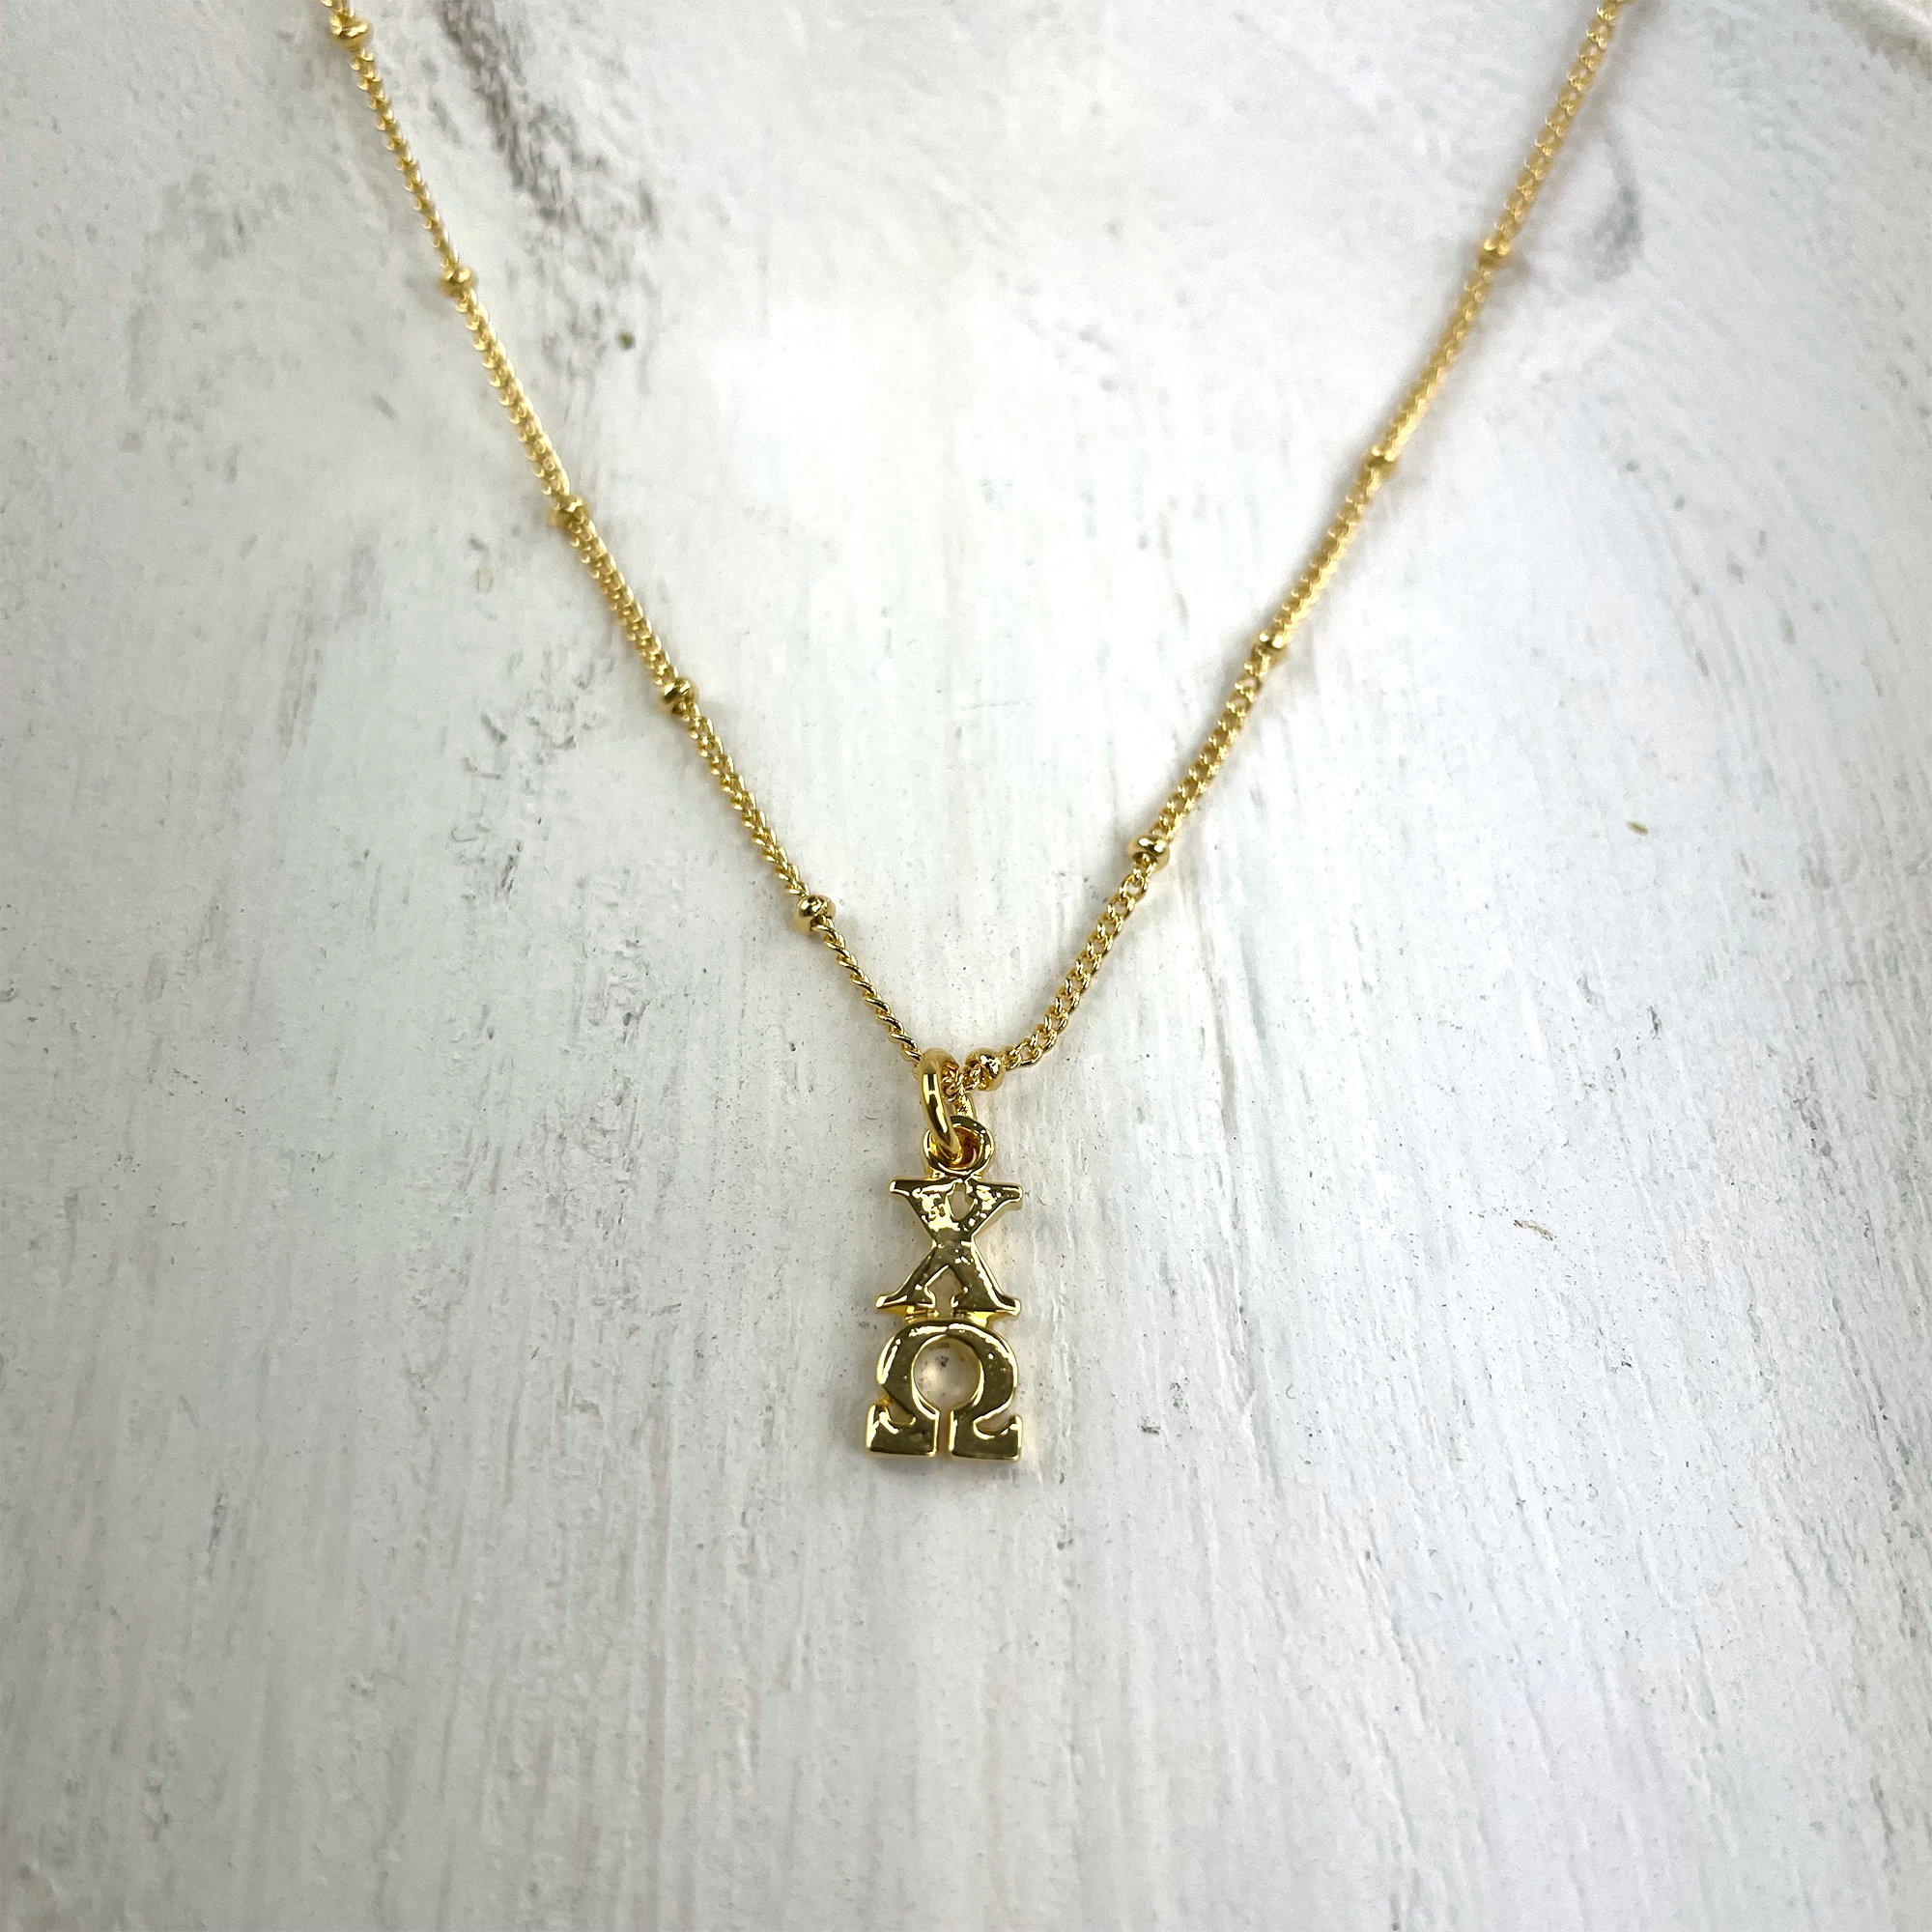 Chi Omega Lavaliere Gold Necklace - Go Greek Chic